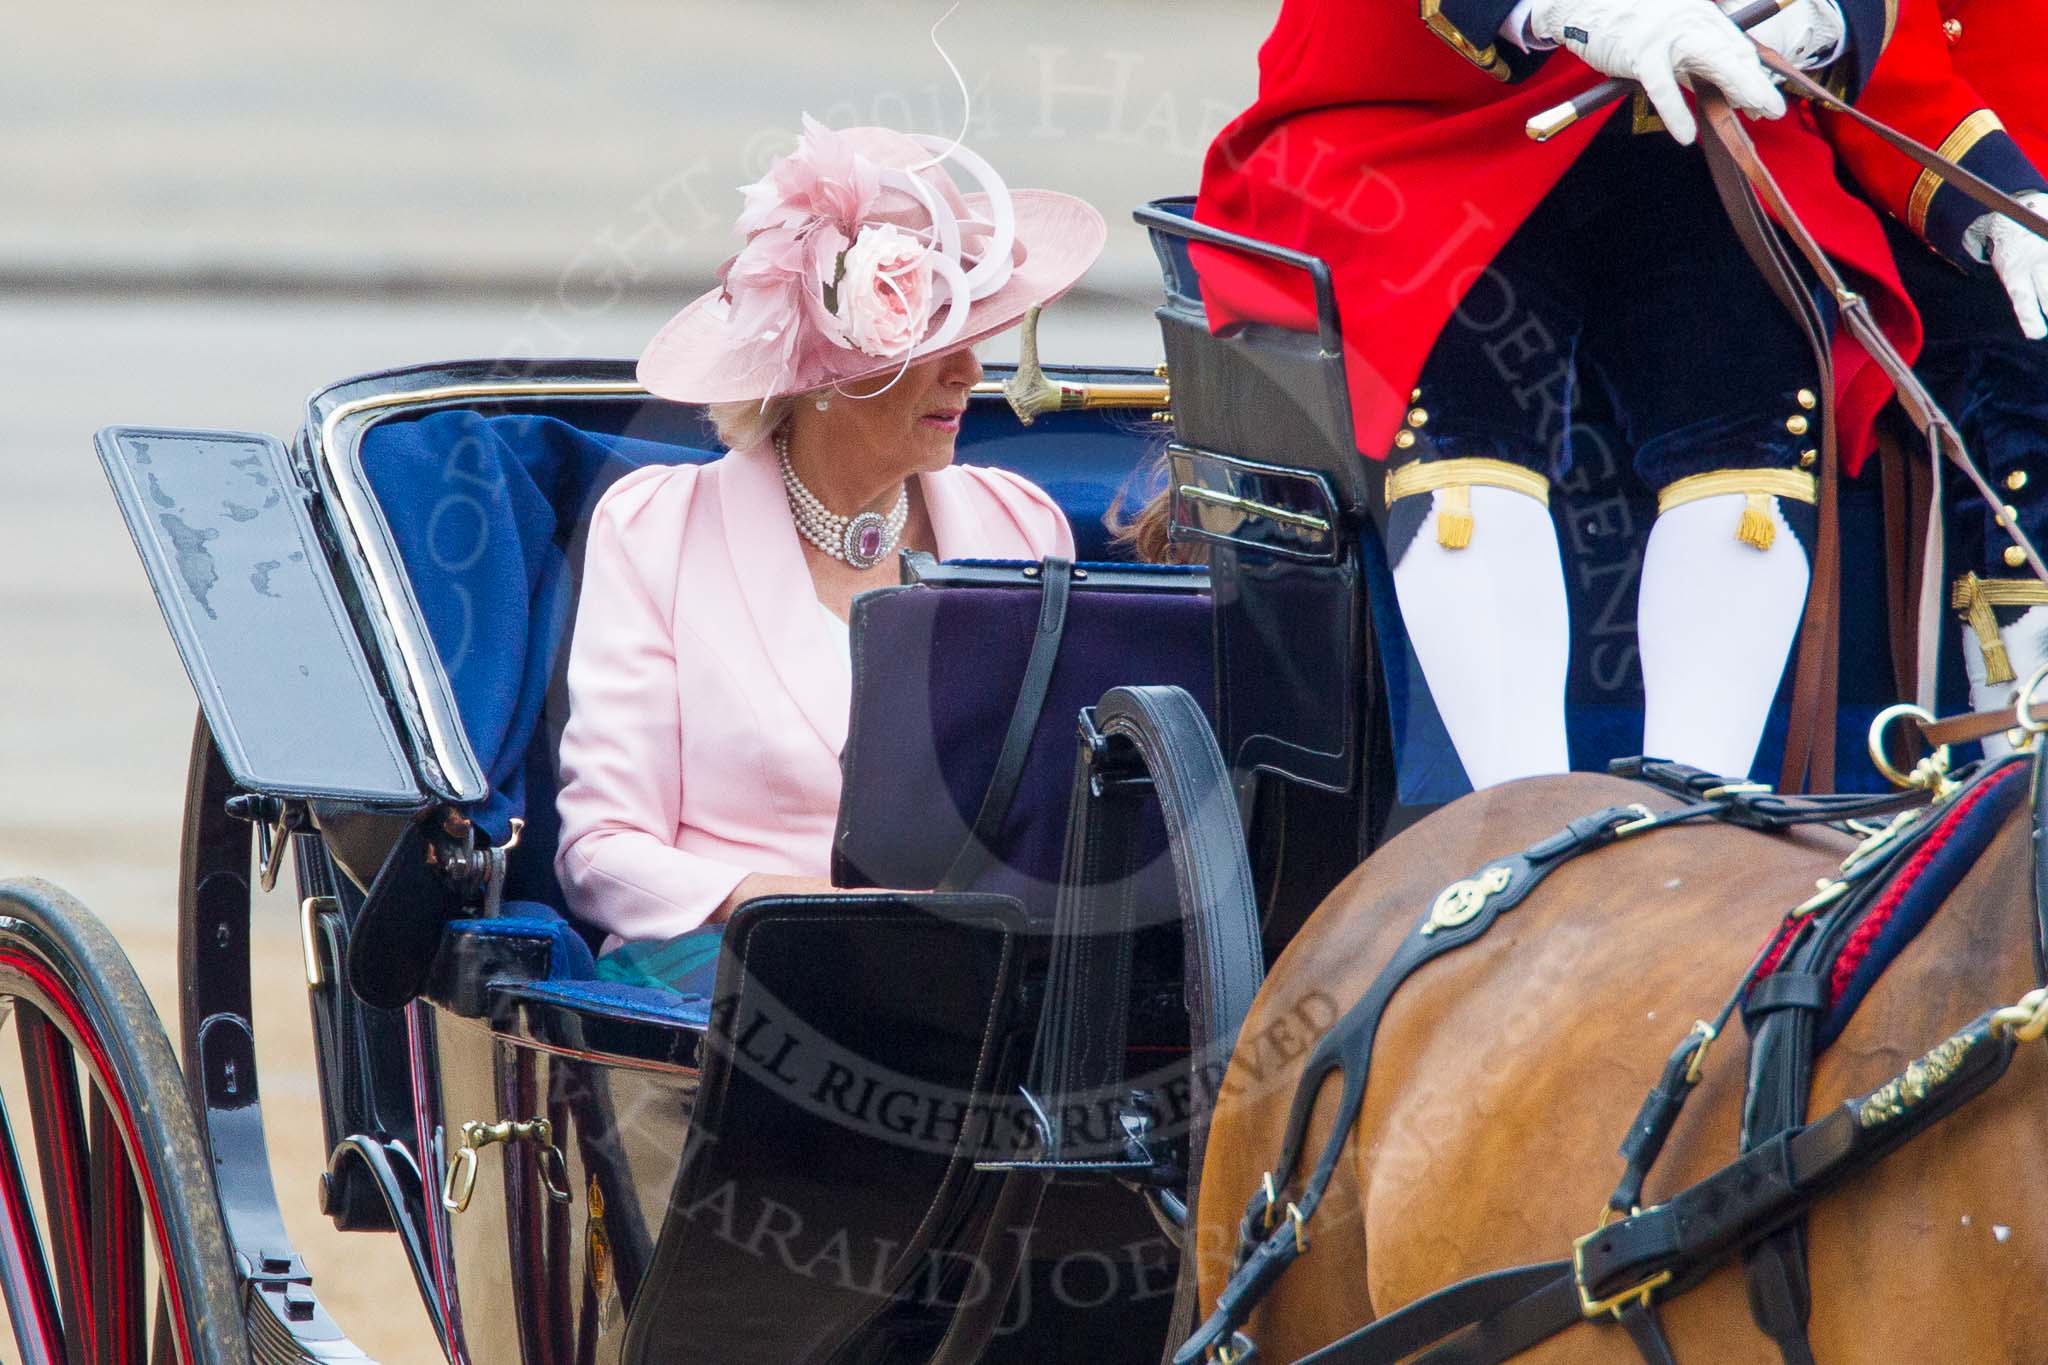 Trooping the Colour 2014.
Horse Guards Parade, Westminster,
London SW1A,

United Kingdom,
on 14 June 2014 at 10:49, image #273